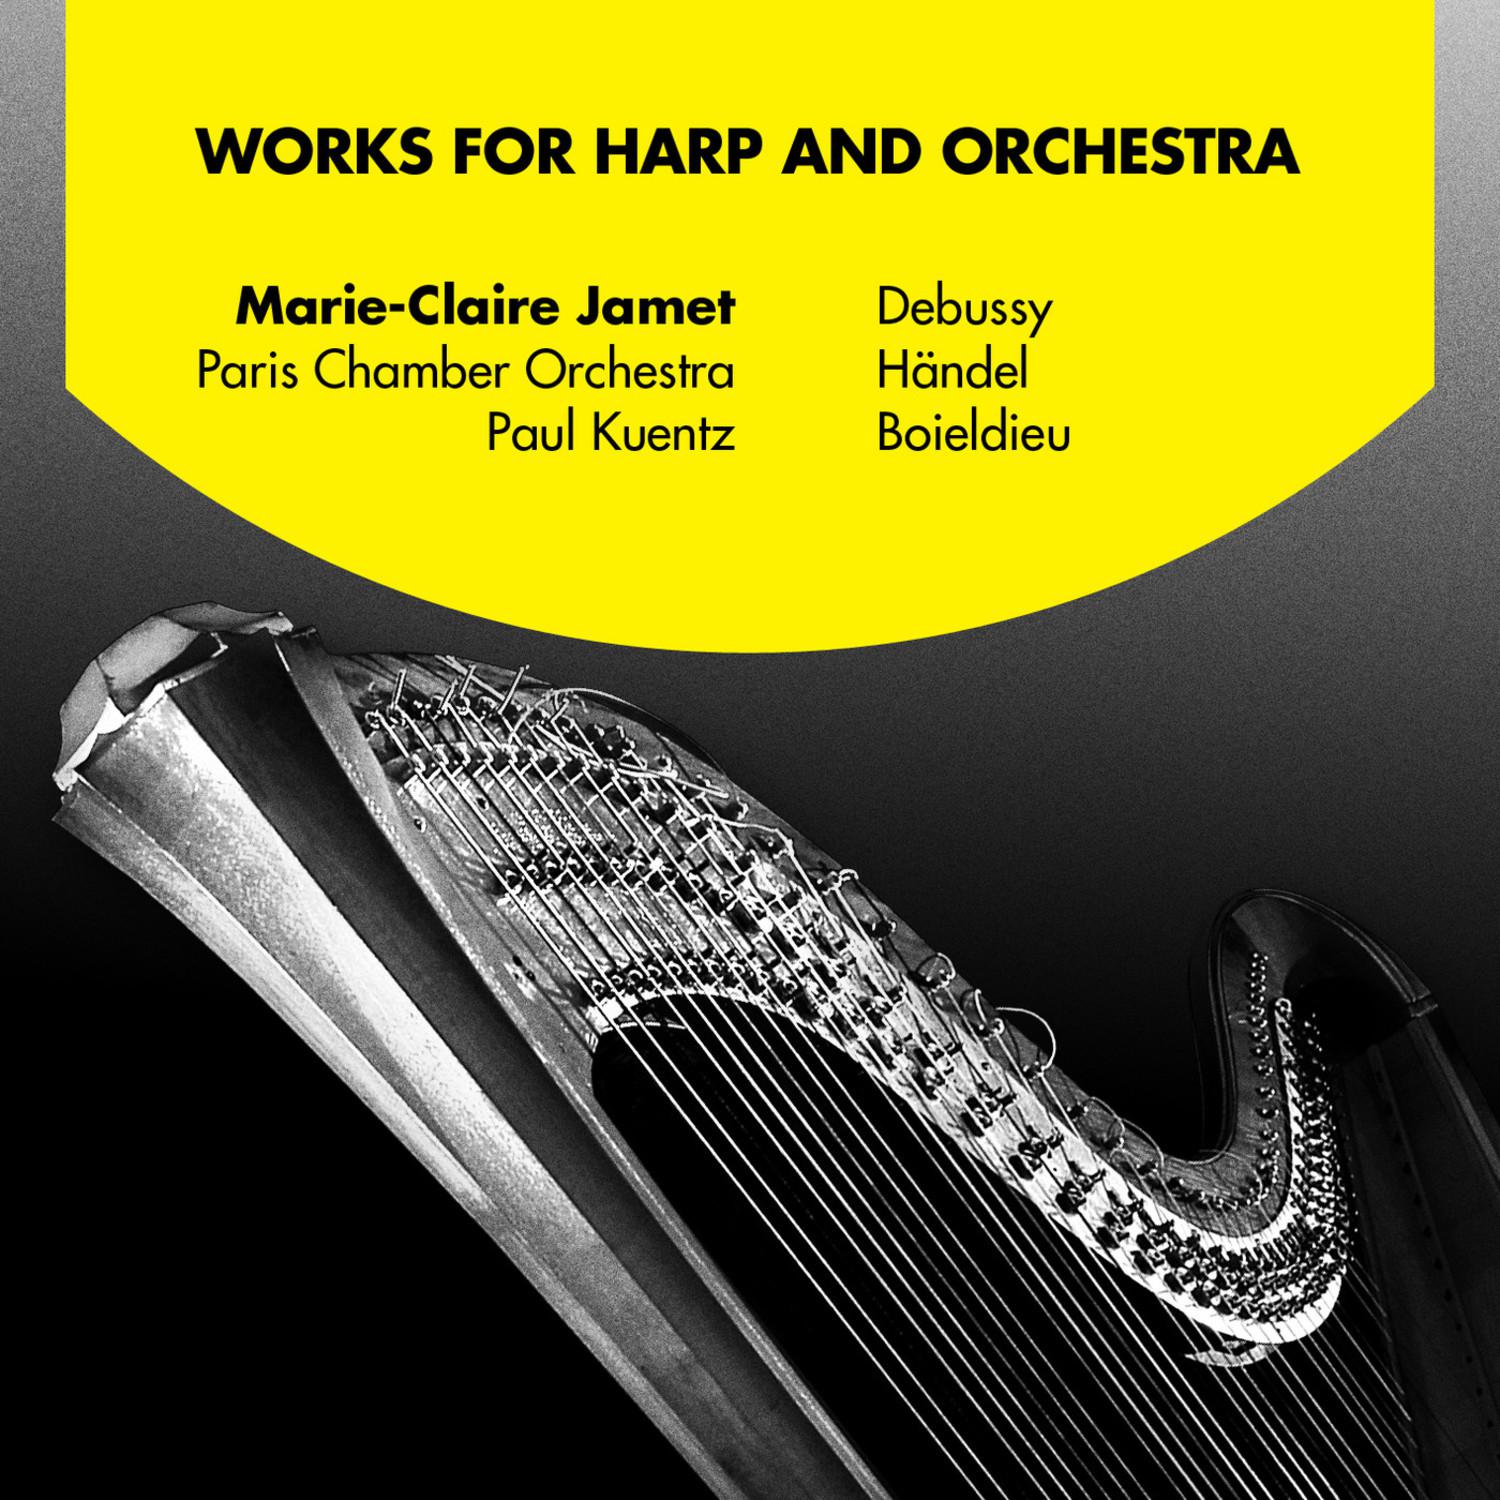 Works for Harp and Orchestra: Debussy, H ndel and Boieldieu